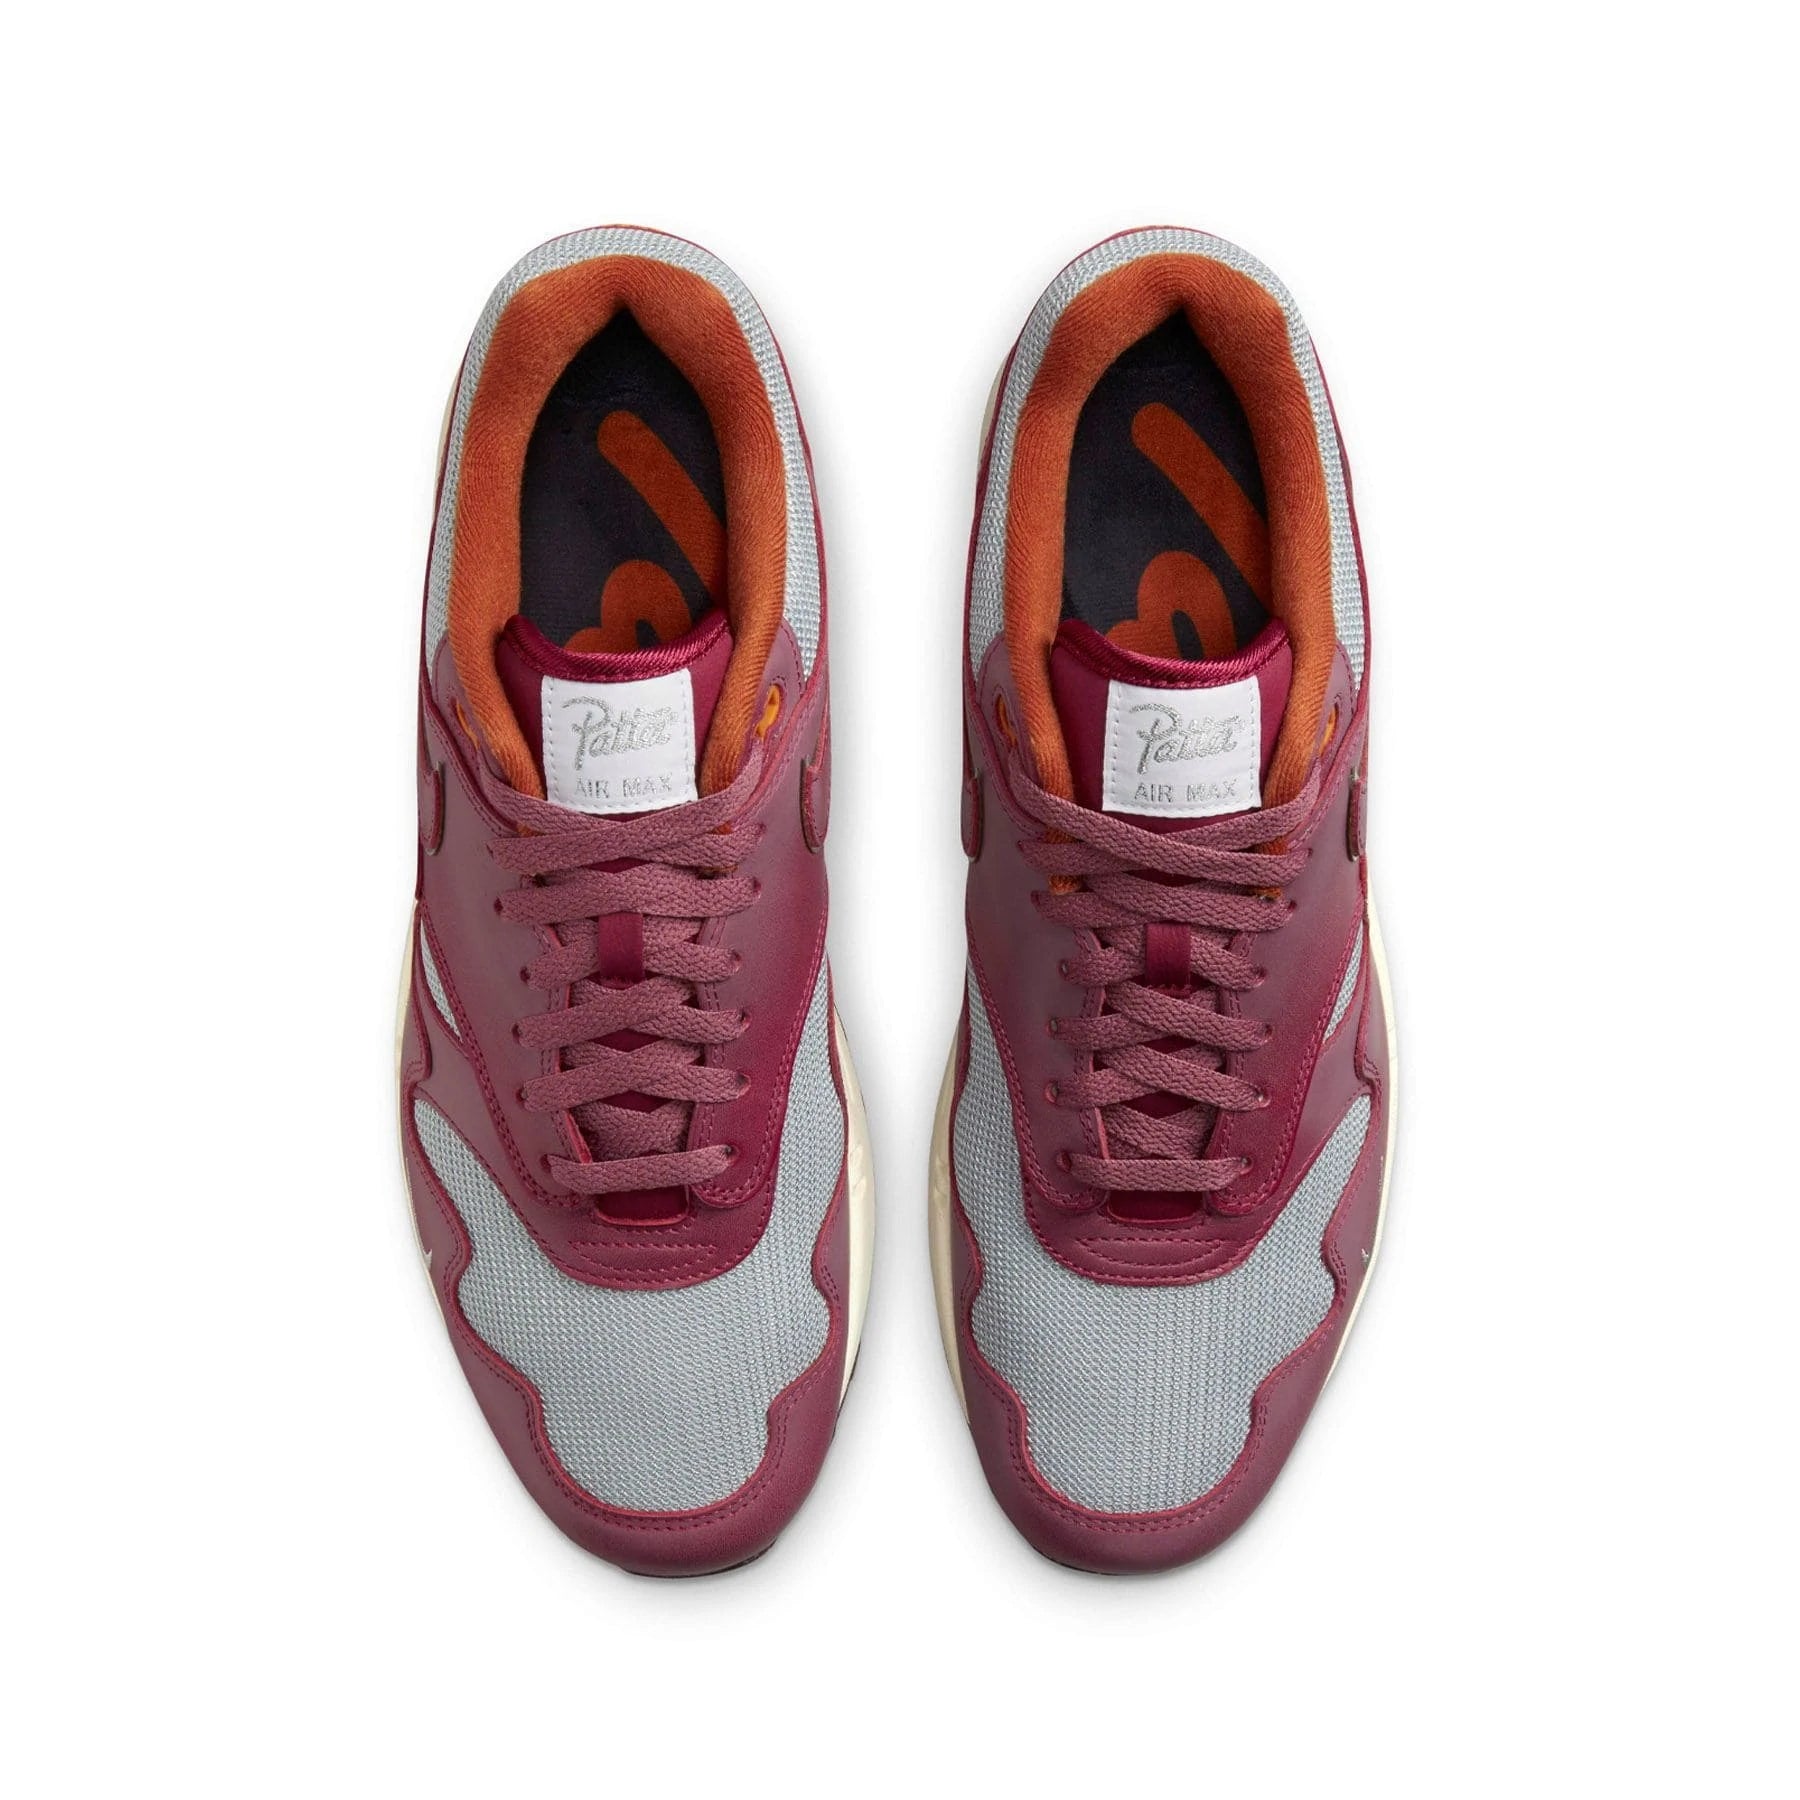 Double Boxed  299.99 Nike x Patta Air Max 1 Waves Rush Maroon Double Boxed